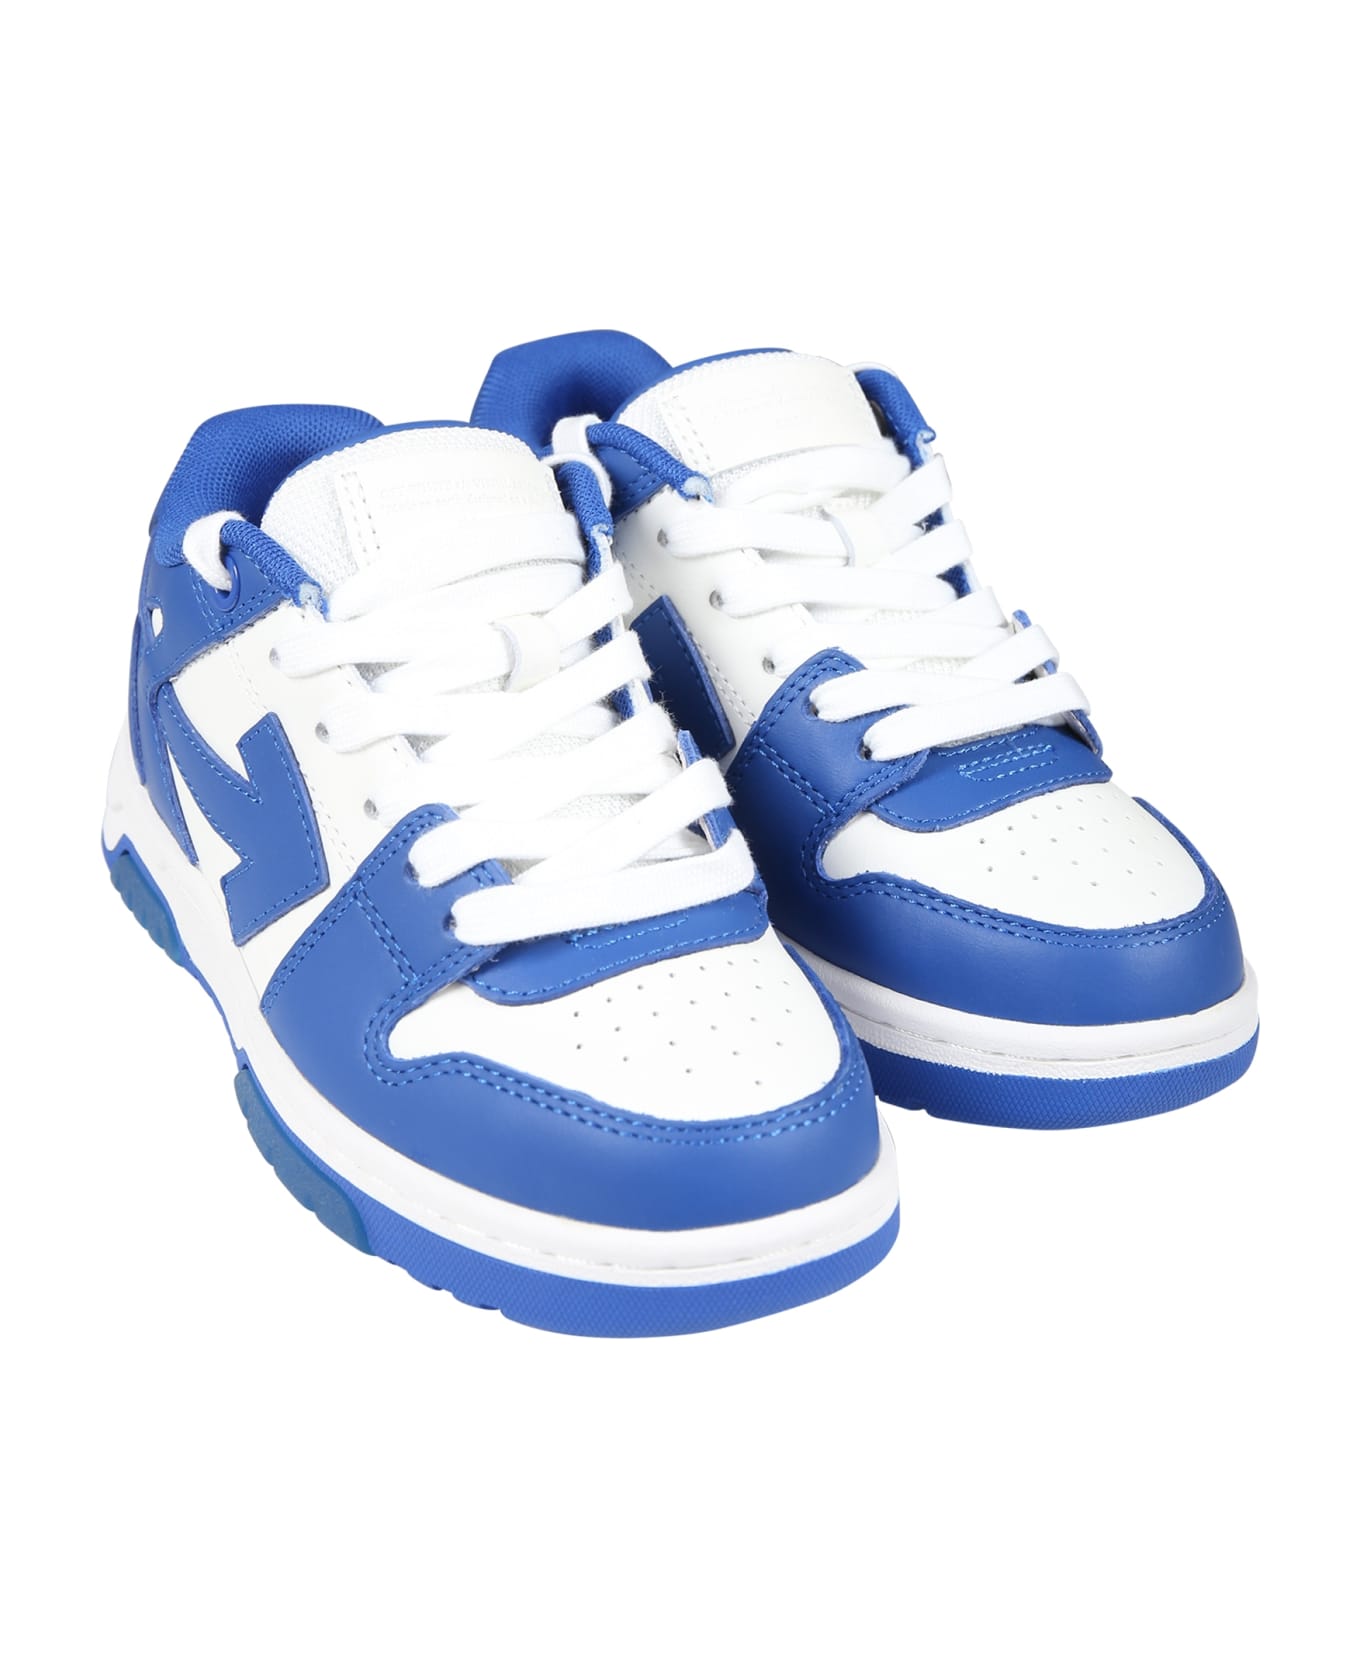 Off-White Light Blue Sneakers For Boy With Arrows - Light Blue